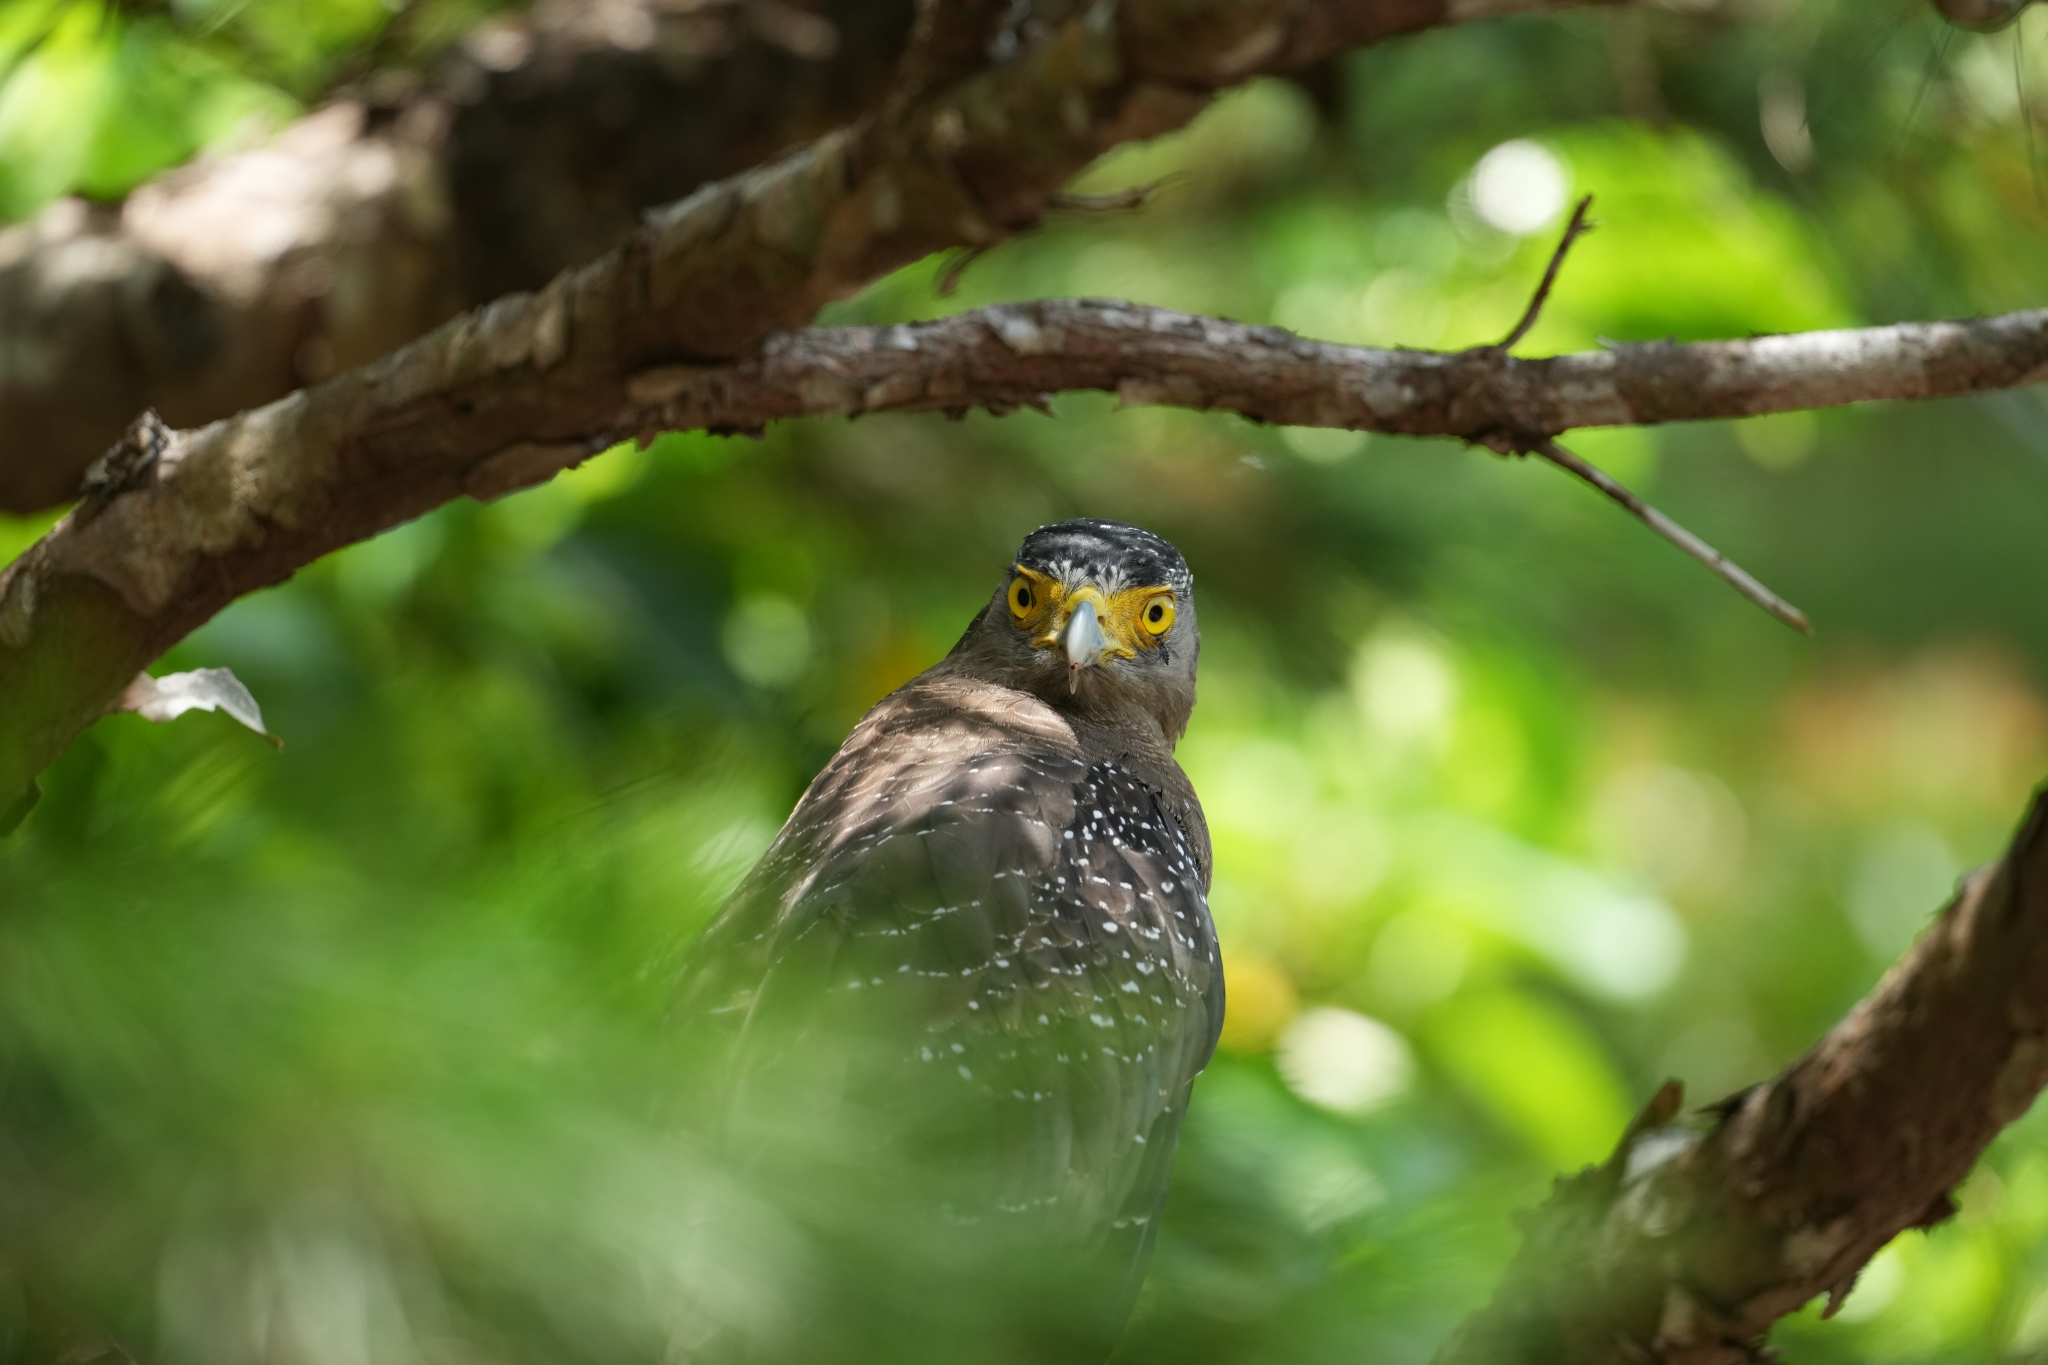 A bird viewed between branches with leaves in bokeh background